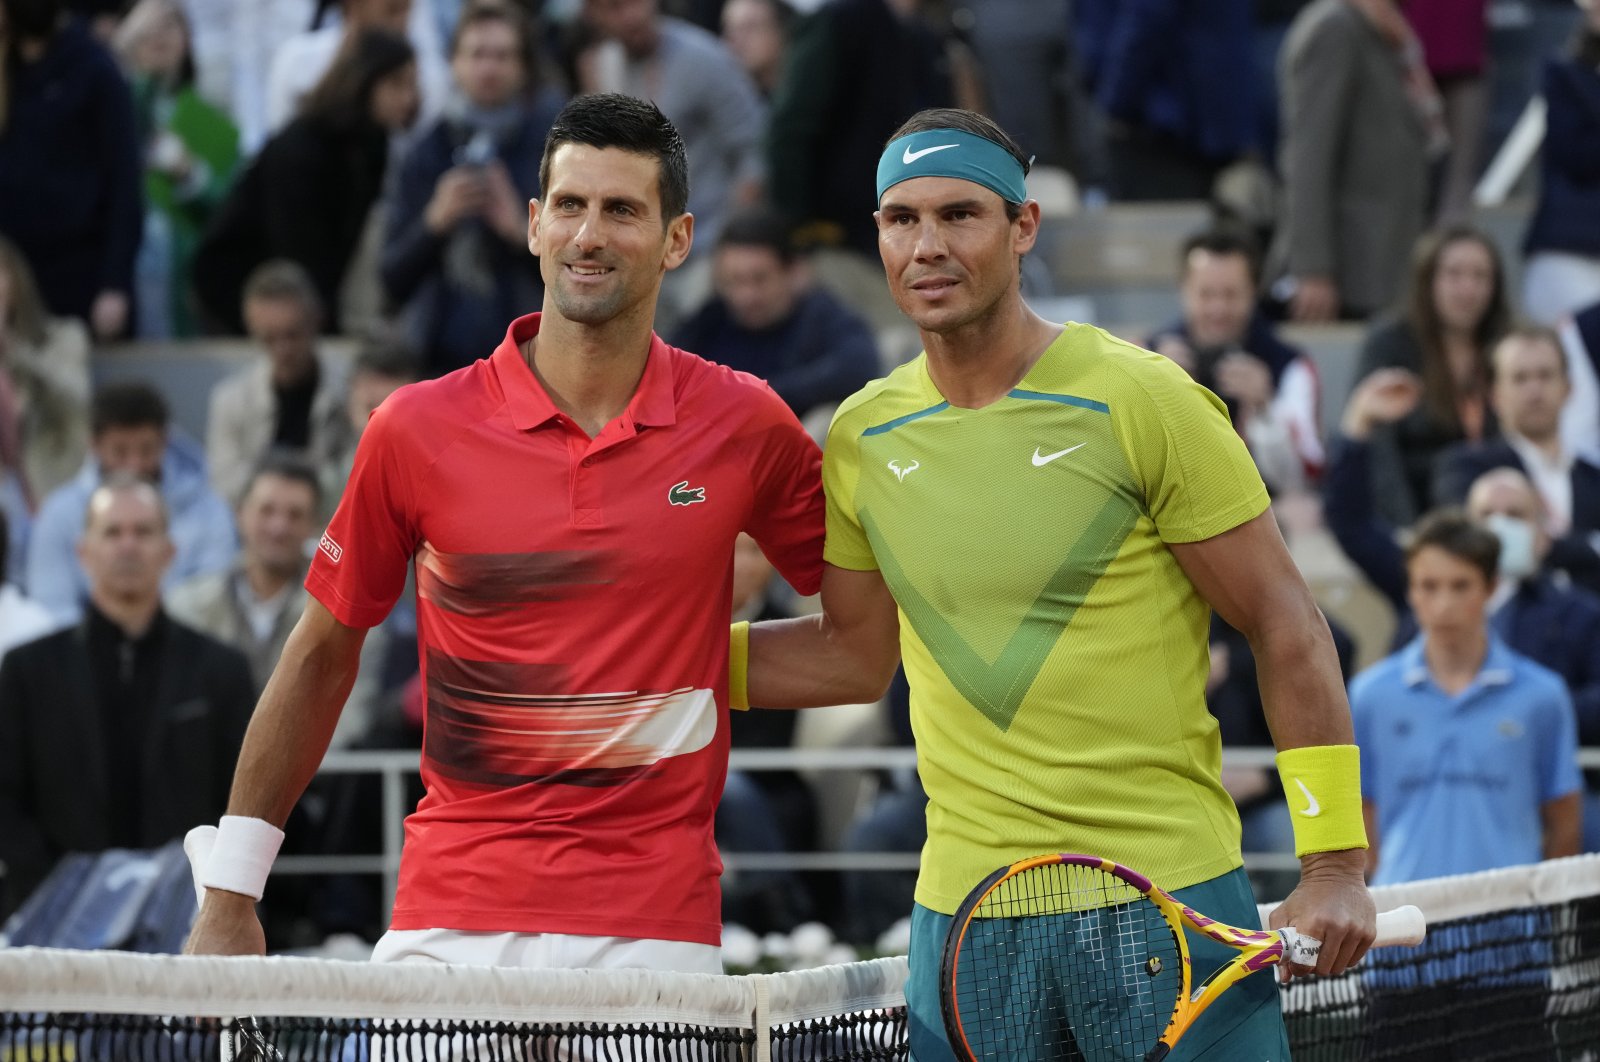 Serbia&#039;s Novak Djokovic (L) and Spain&#039;s Rafael Nadal pose ahead of their quarterfinal match at the French Open tennis tournament in Roland Garros stadium in Paris, France, May 31, 2022. (AP Photo)